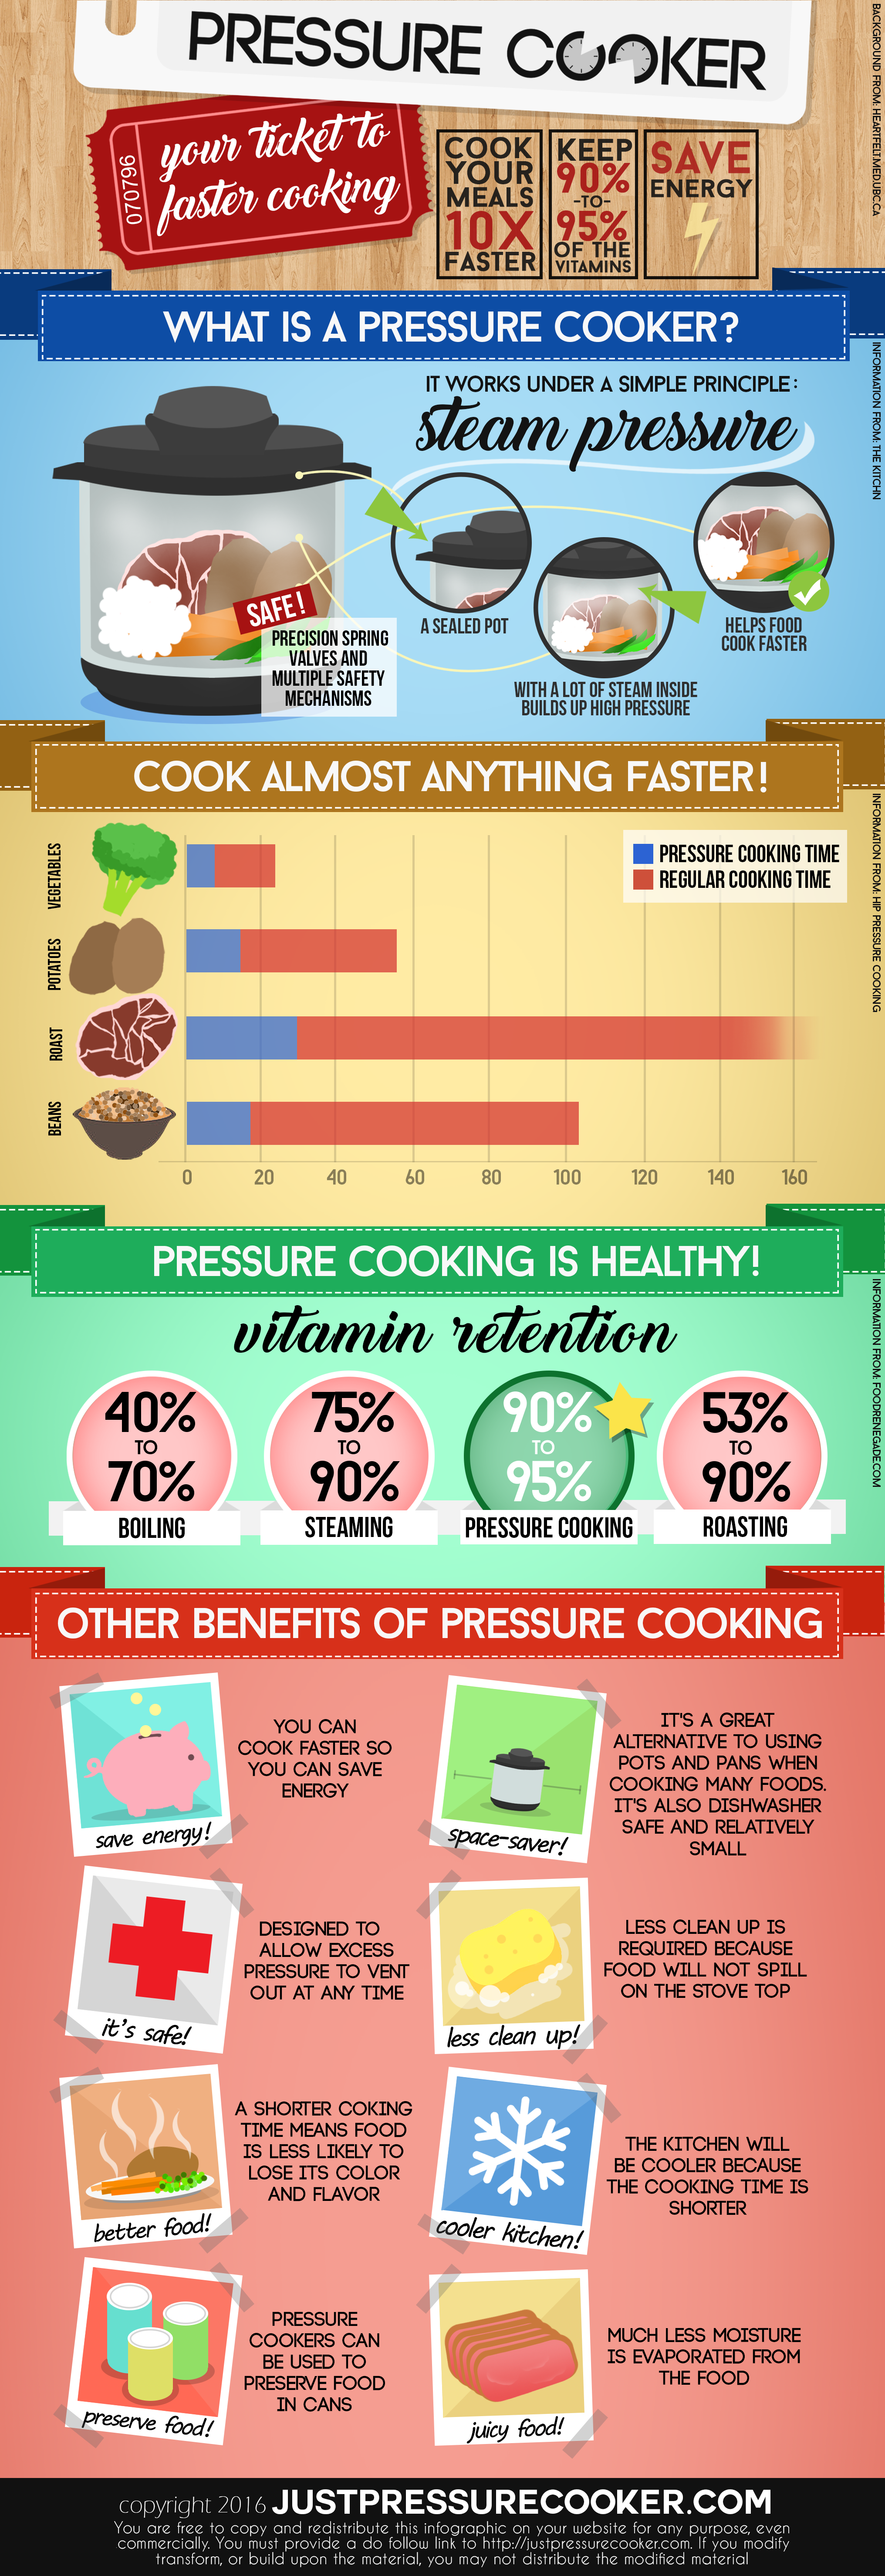 Advantages of Pressure Cookers